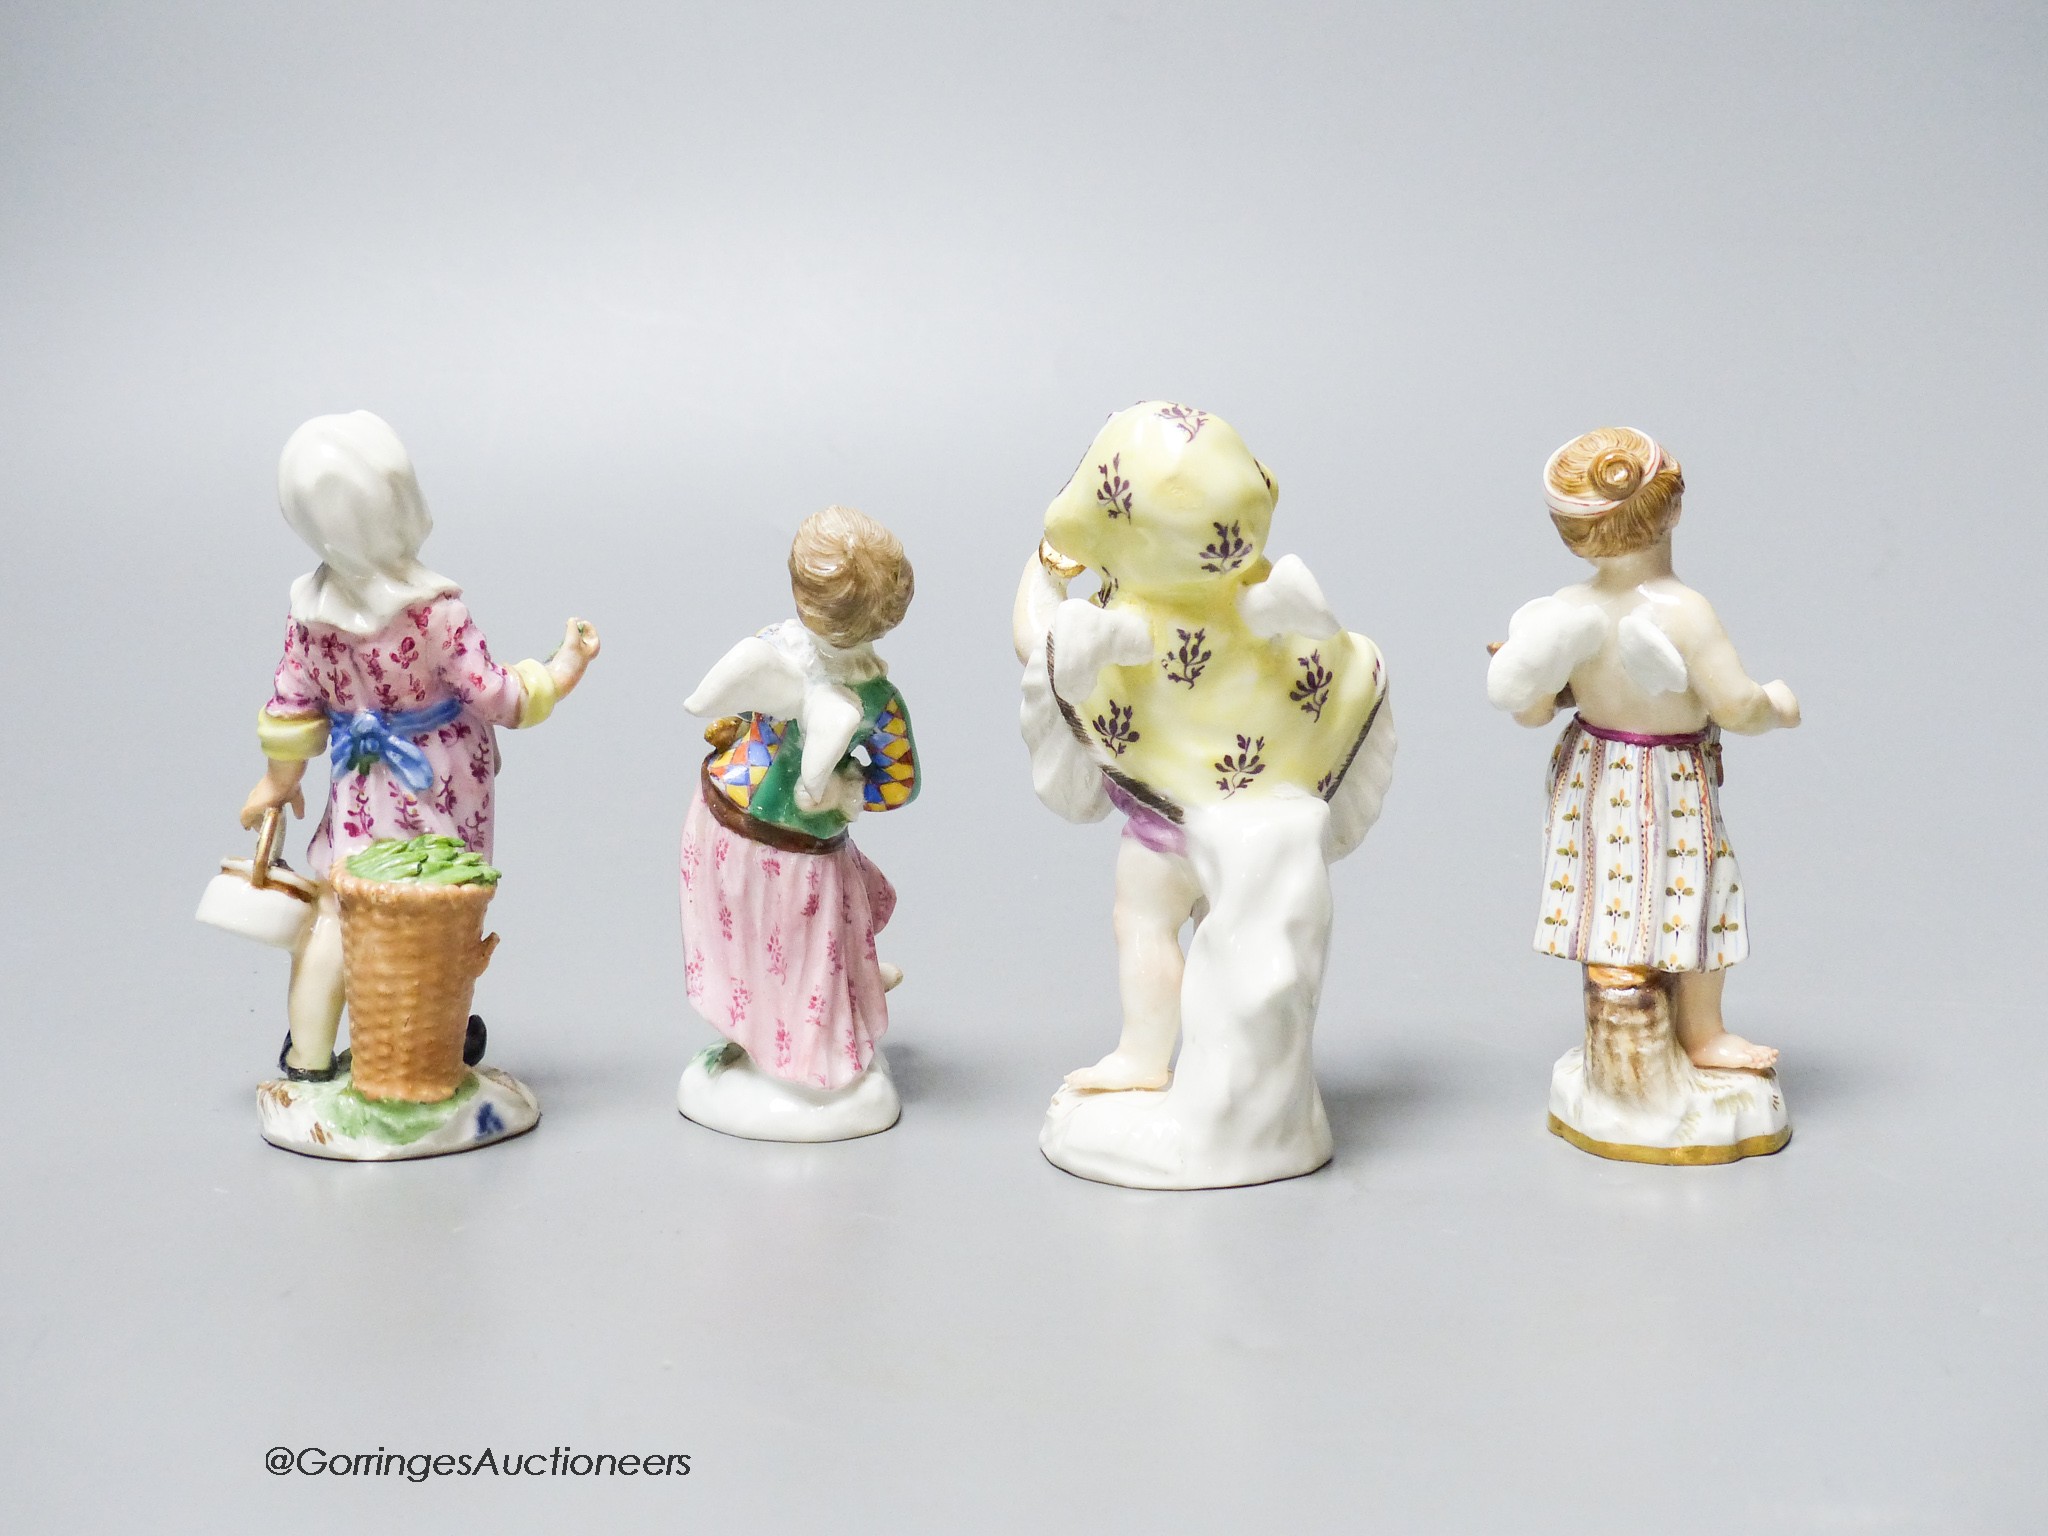 Two mid 18th century Meissen figures of Cupid in disguise and two similar 19th century figures, tallest 9cm